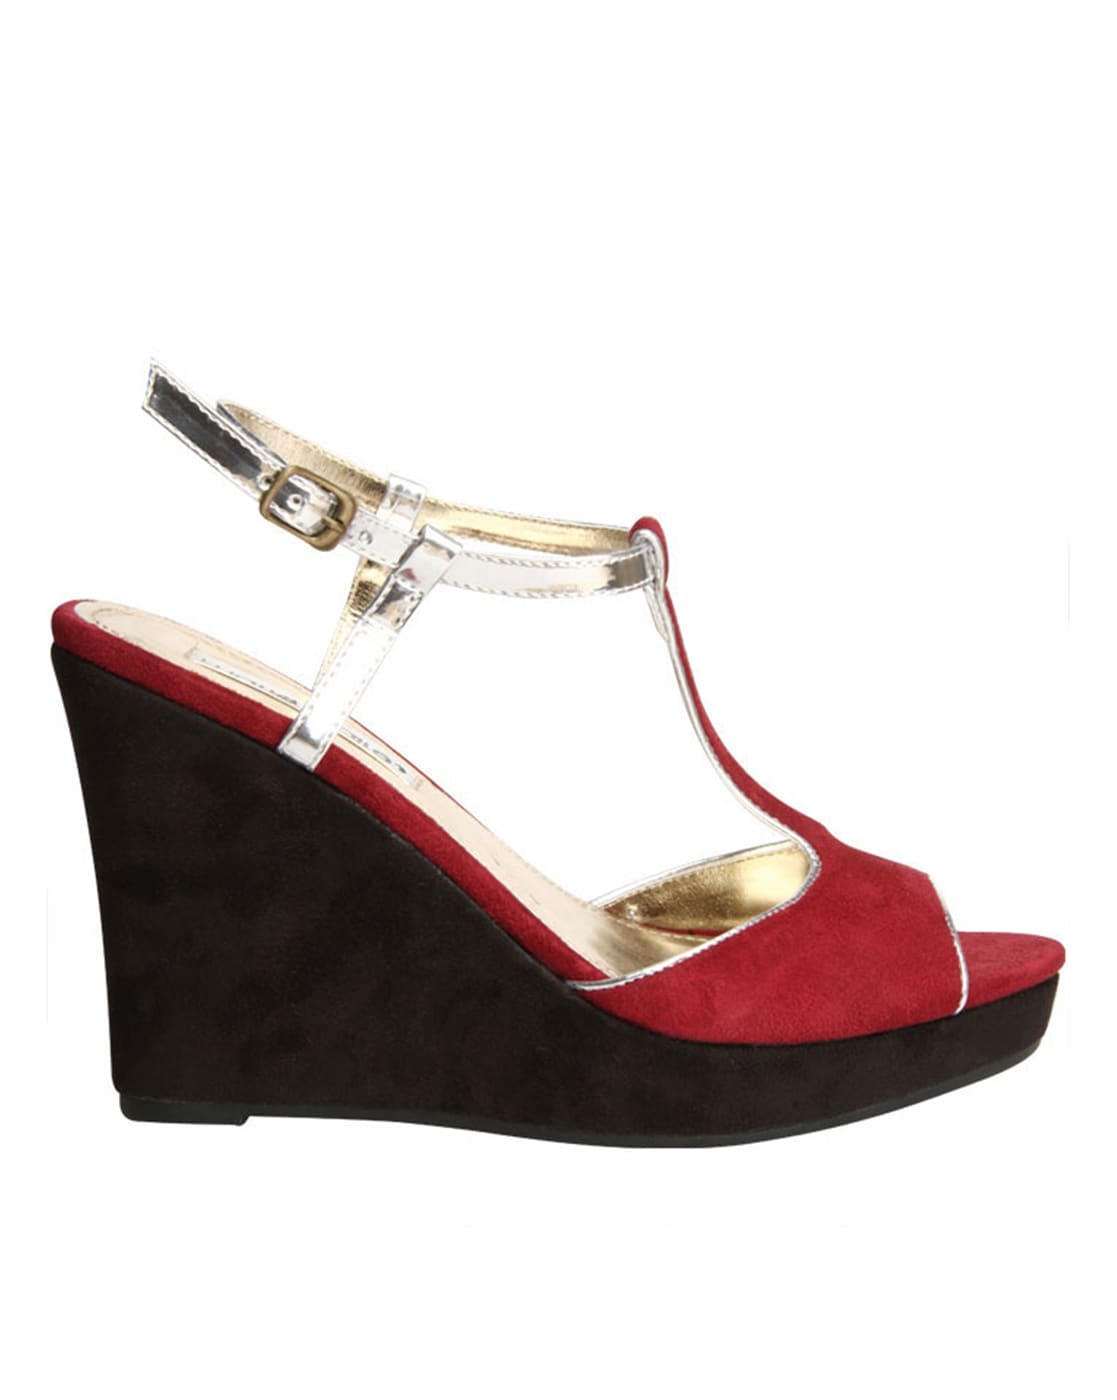 Red Wedges - Buy Red Wedges online in India